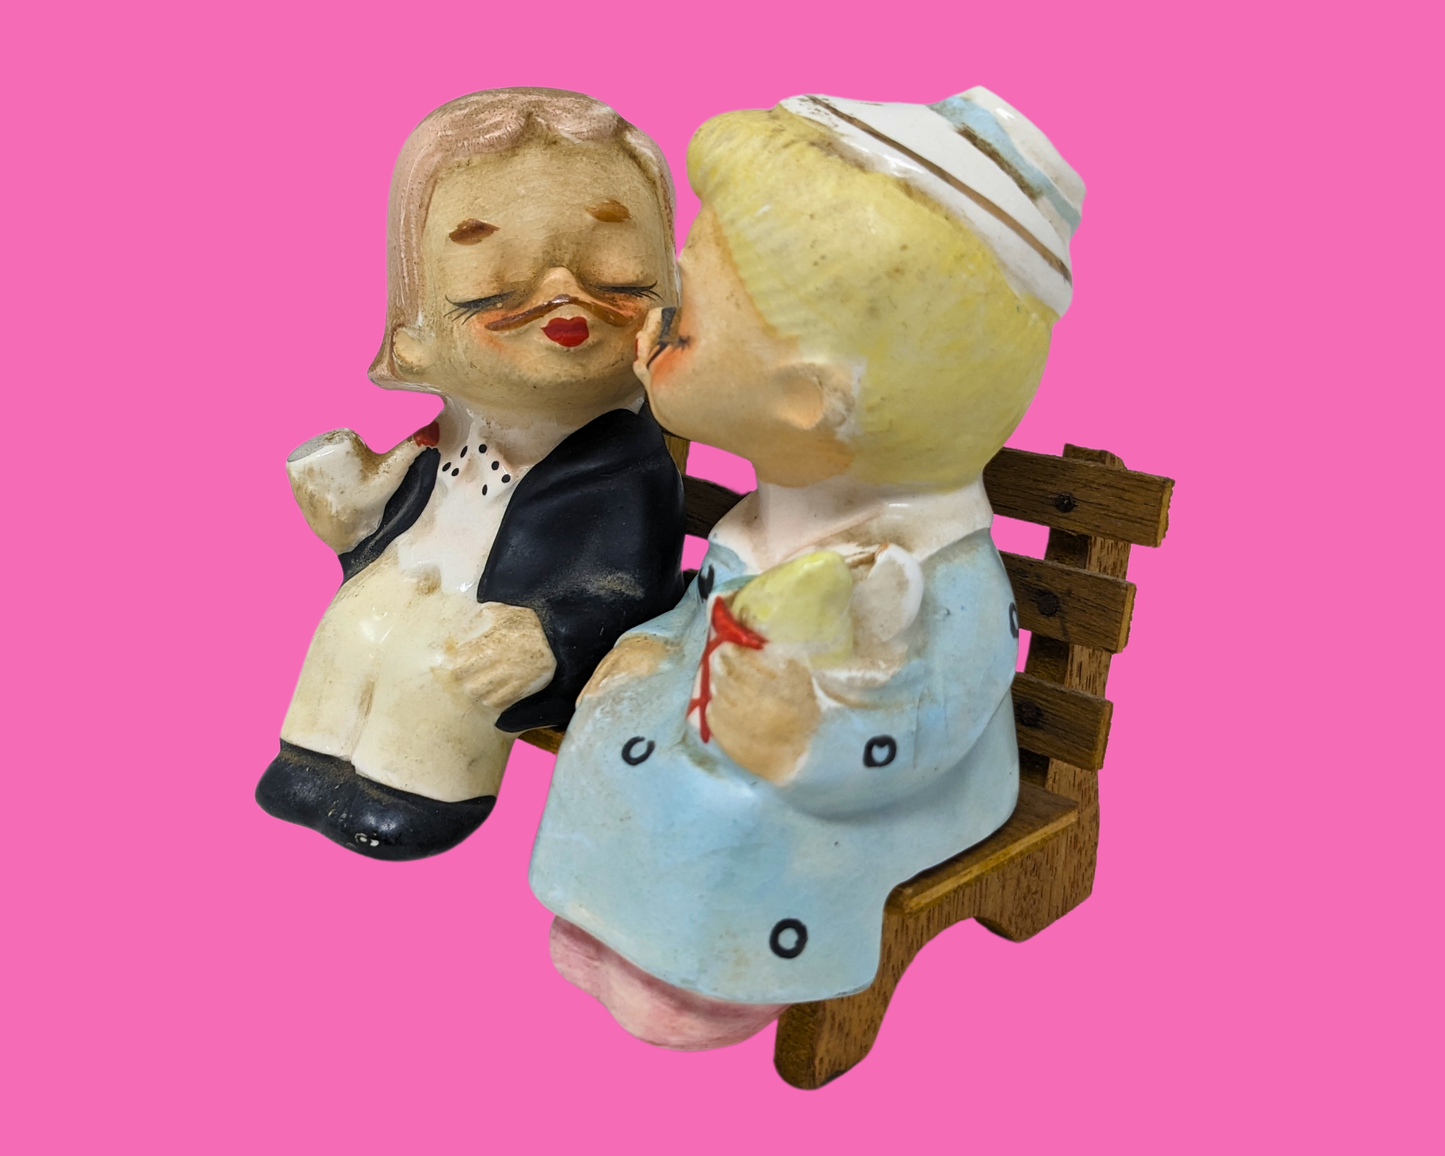 Vintage 1960's Japan Set of Salt and Pepper Shakers, Kissing Couple on a Bench